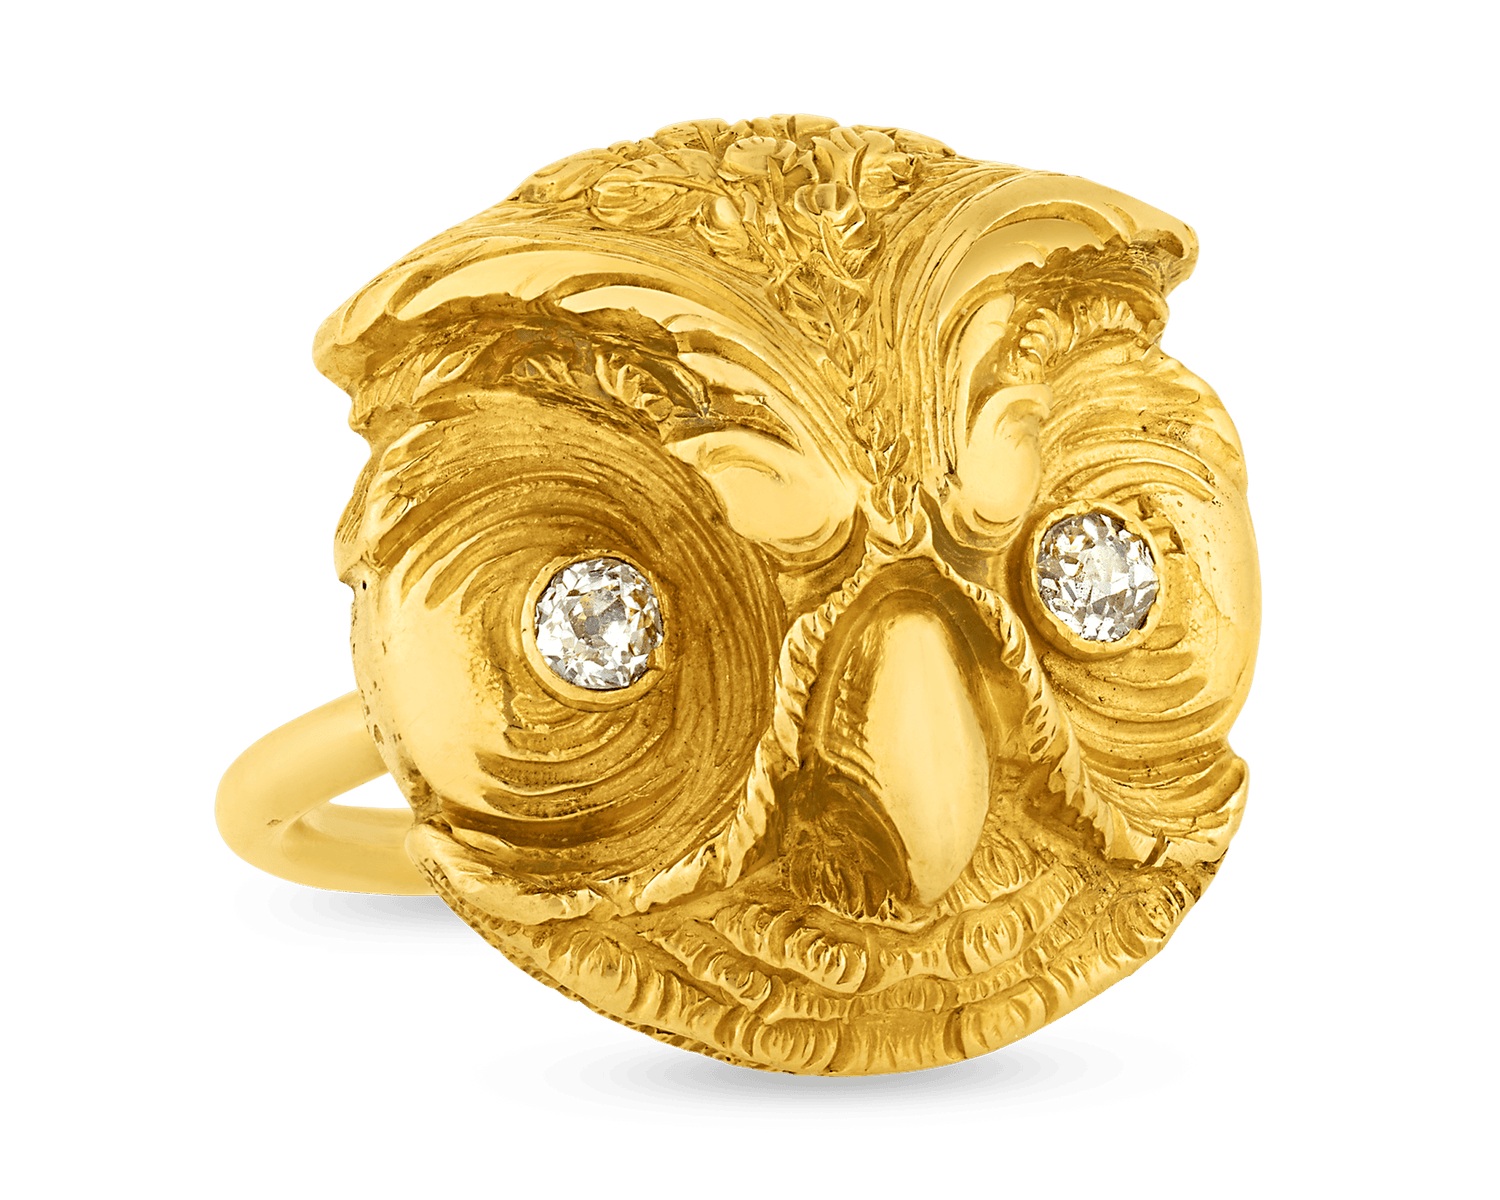 French Owl Ring by Paul Robin